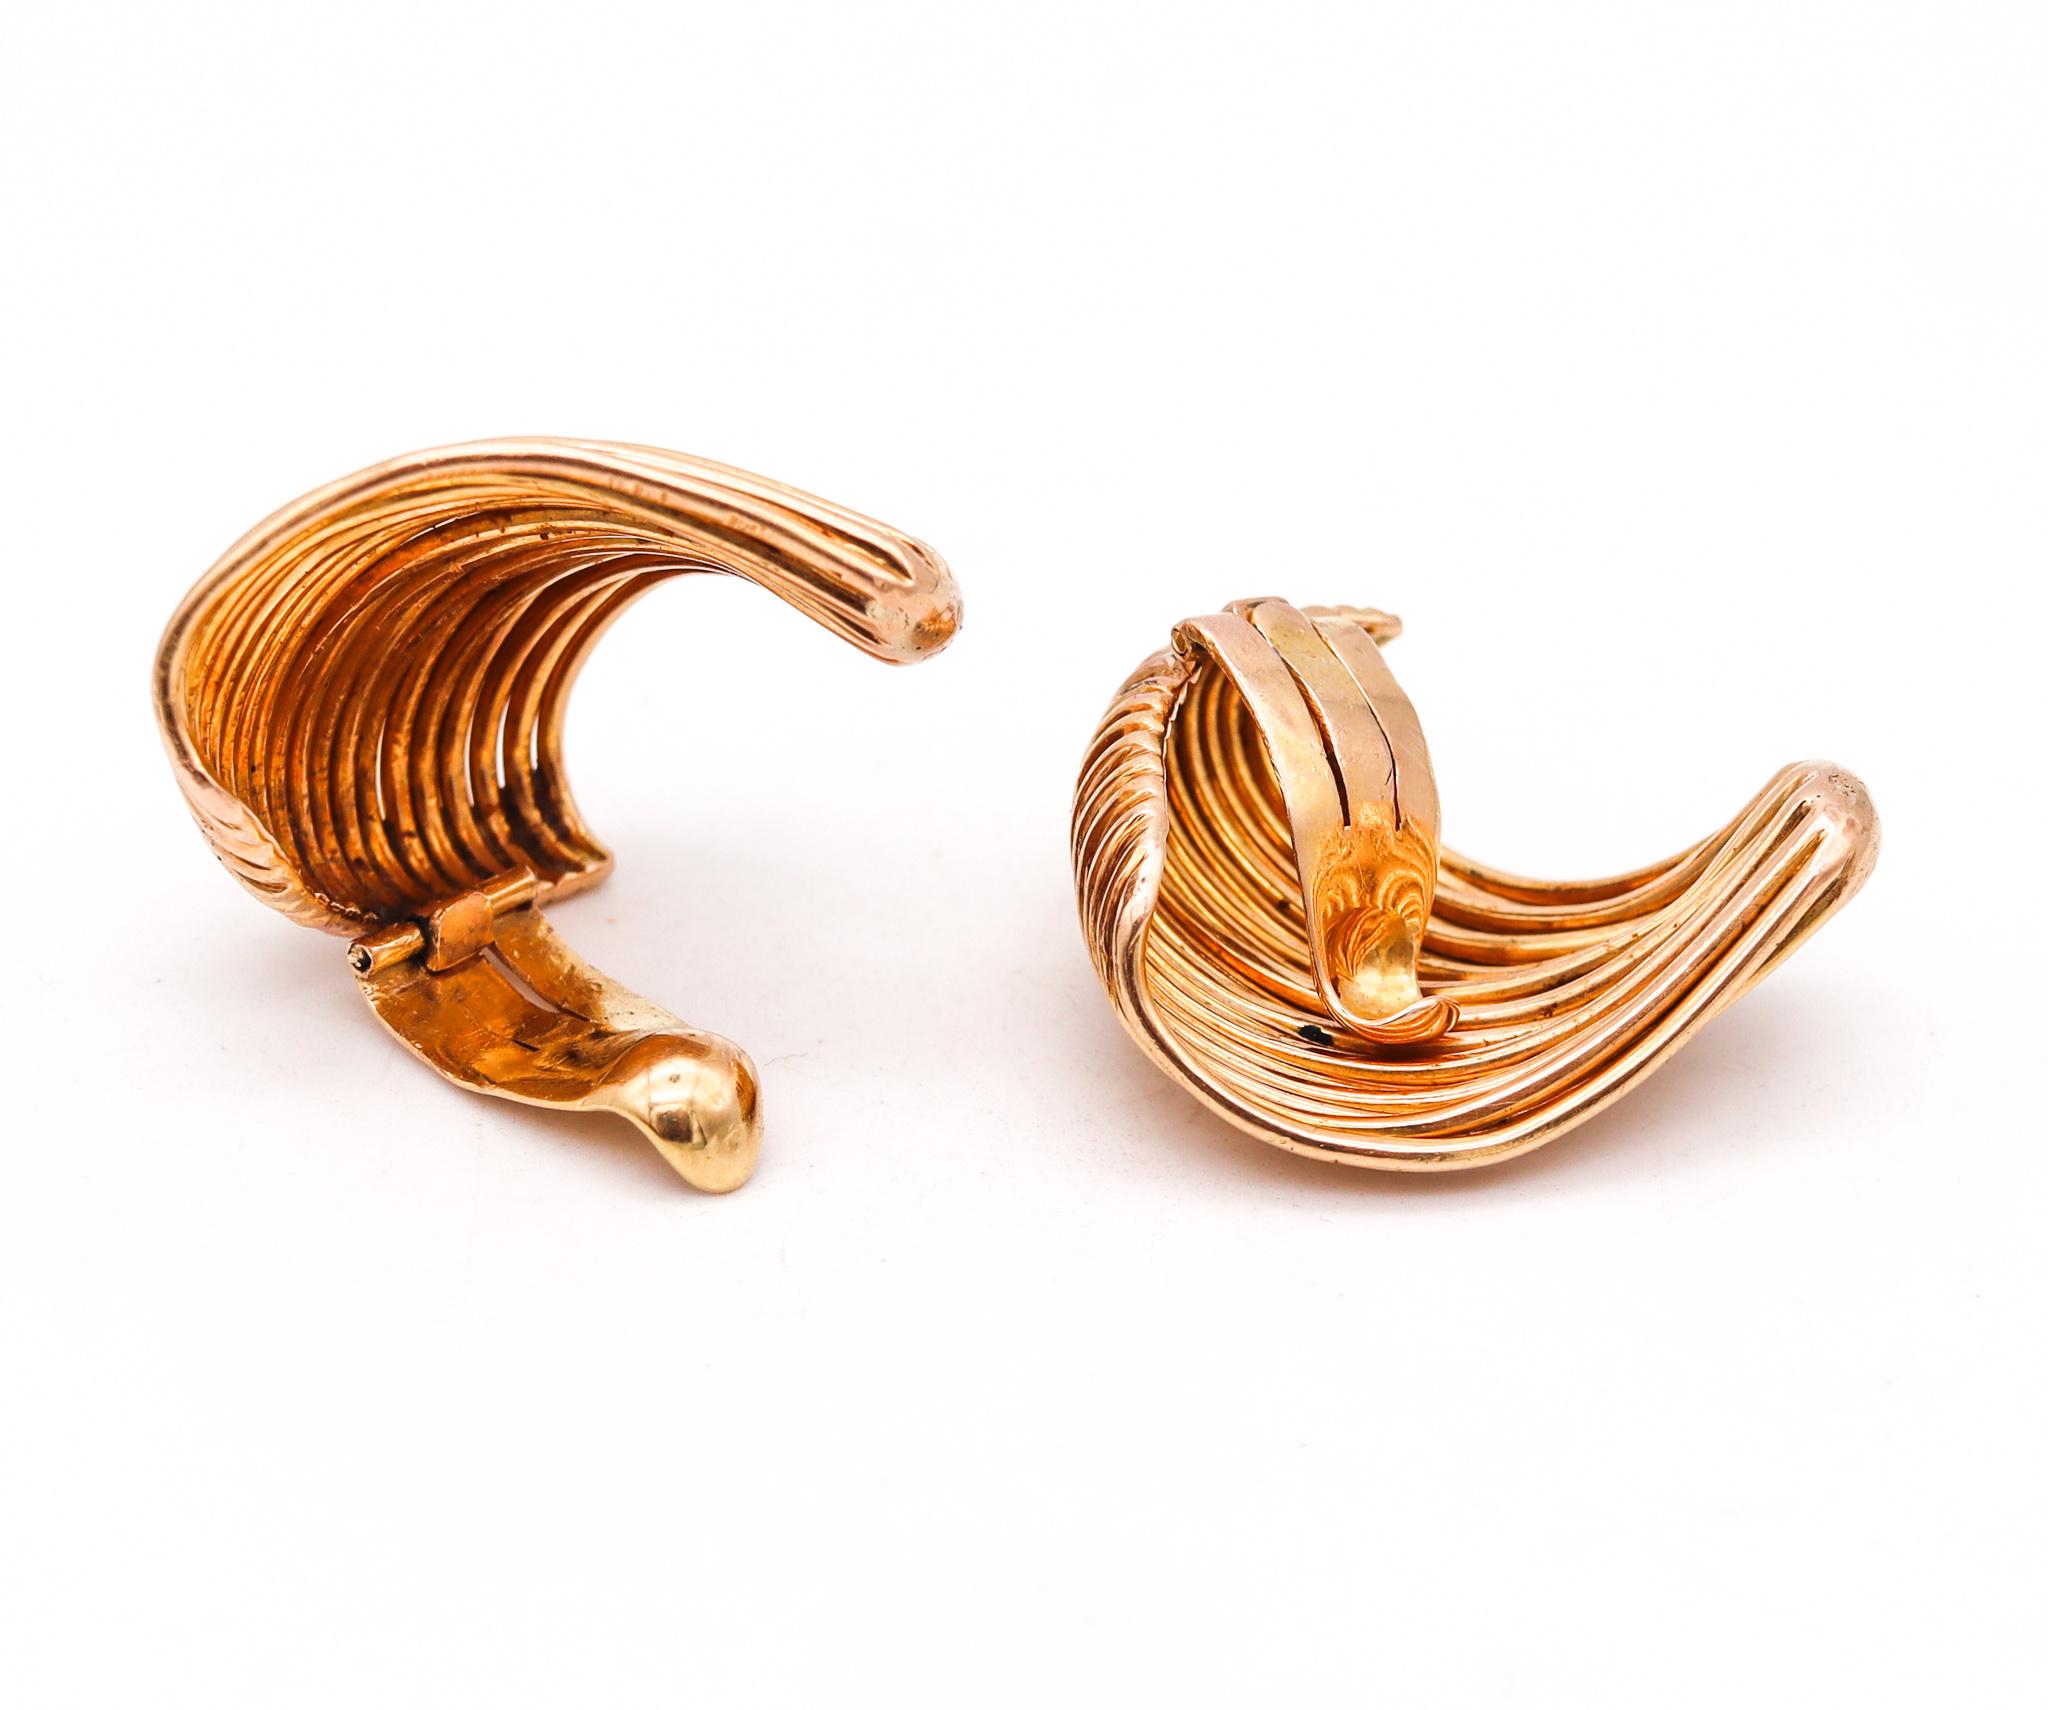 An art deco / retro clips earrings.

Sculptural pair of clips earrings created during the late art deco period with retro industrial patterns, circa 1940. This beautiful wavy pieces has been made with a conjunction of overlapping curved wires